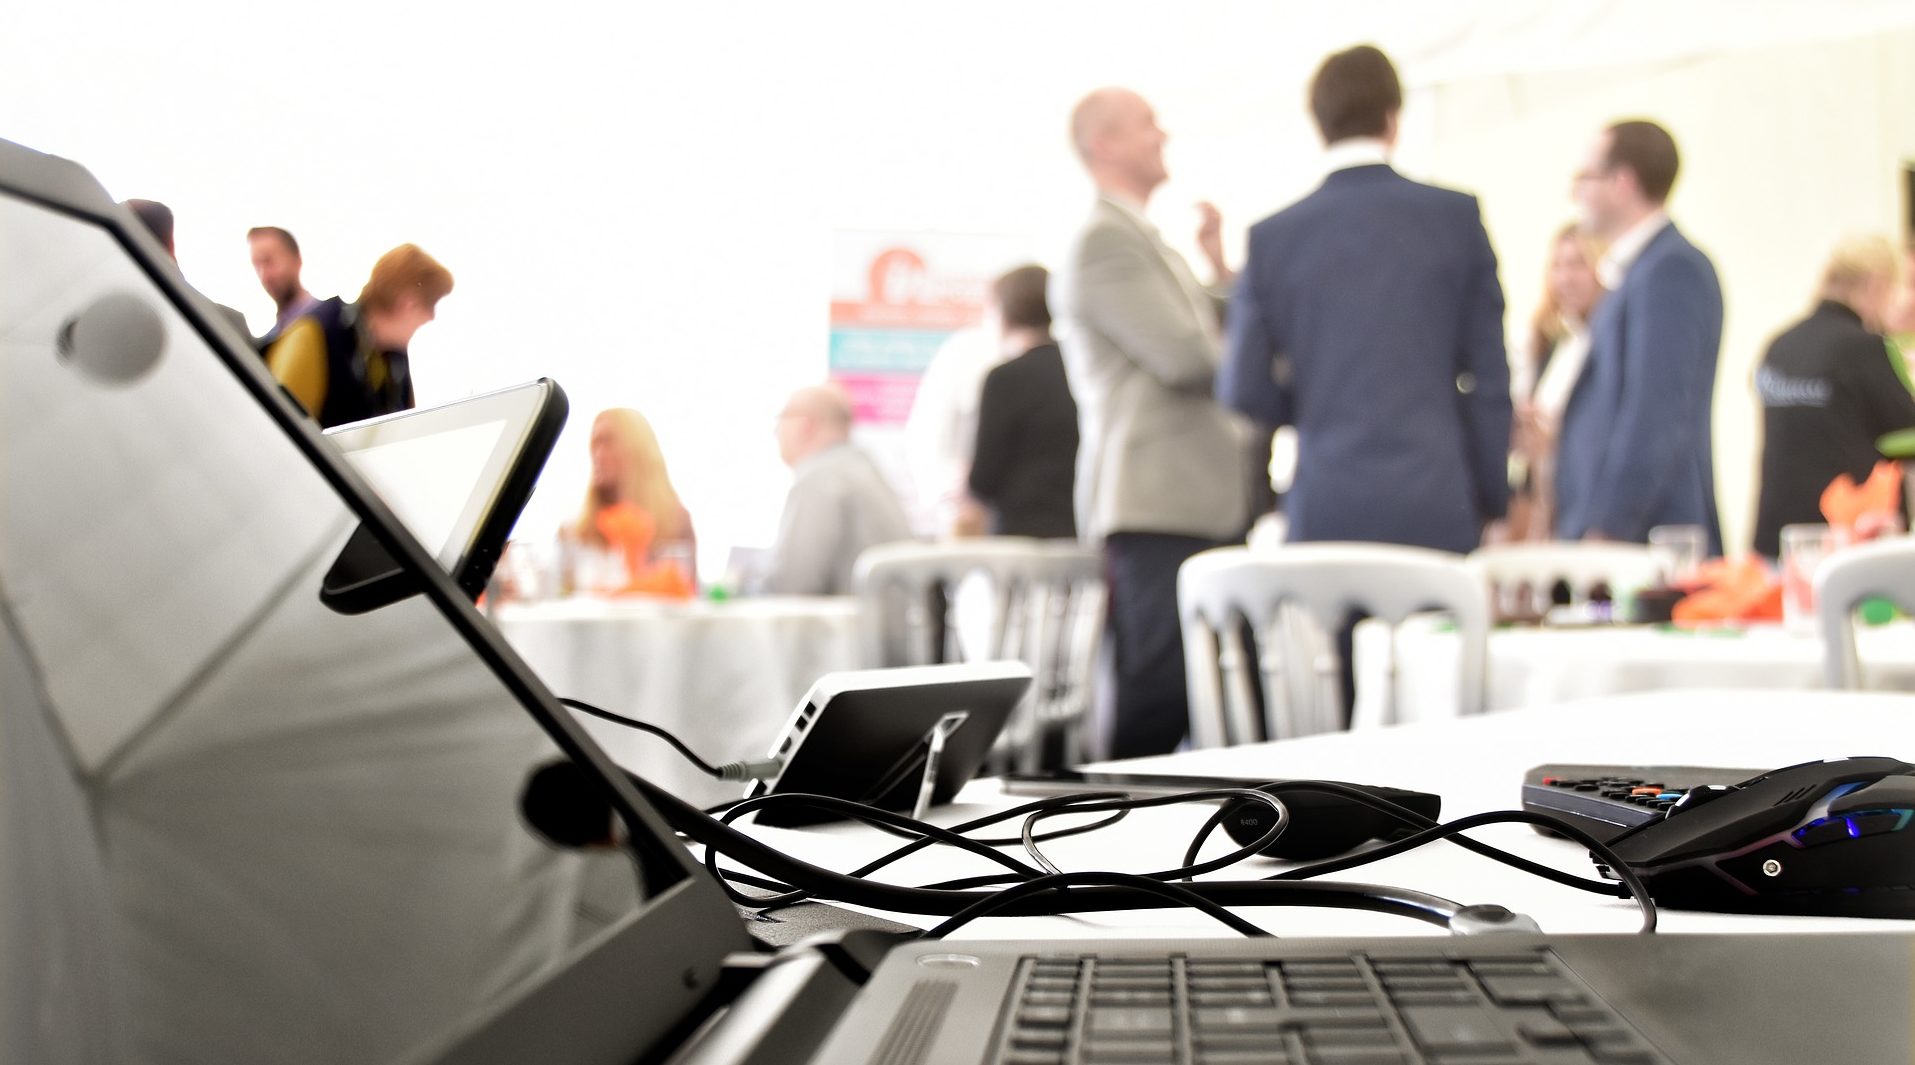 Laptop and equipment on a table with focused foreground, blurry background showing millennials networking in a white tent event space.